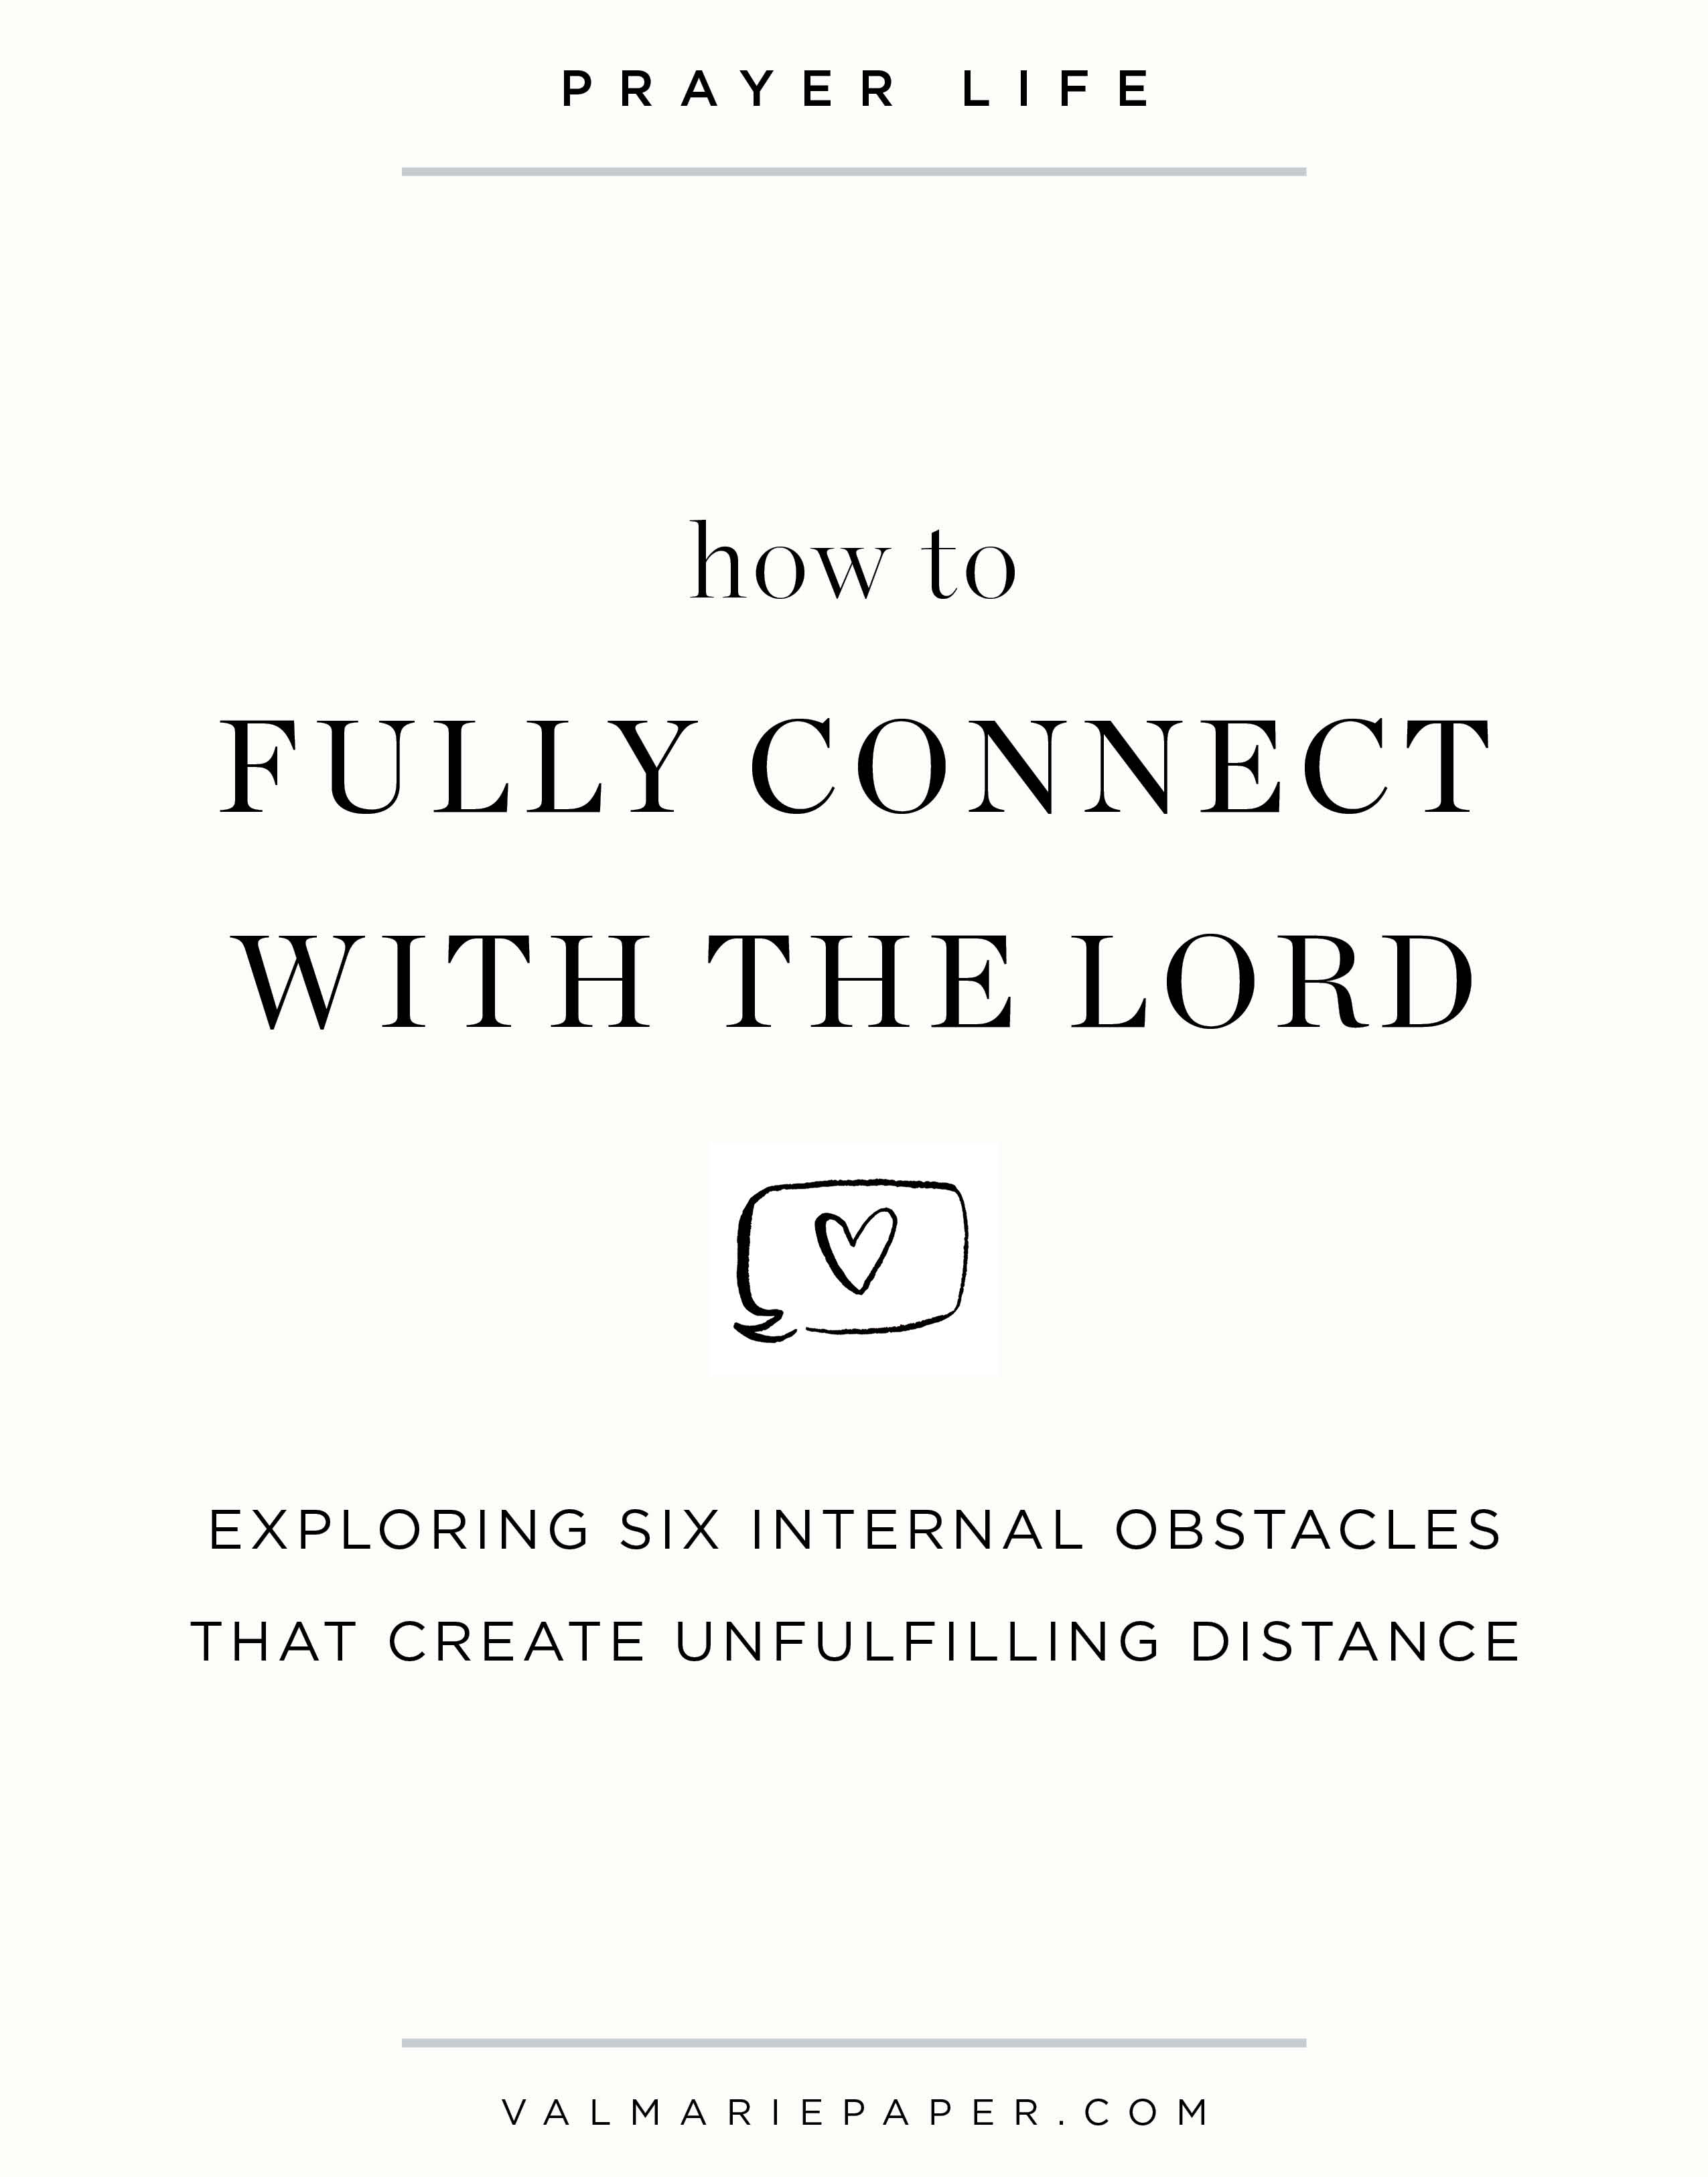 Six things that distance us from God by Valerie Woerner | Val Marie Paper, prayer, how to fully connect with the Lord, relationship, Christian, faith, women's ministry, motherhood, disciplines